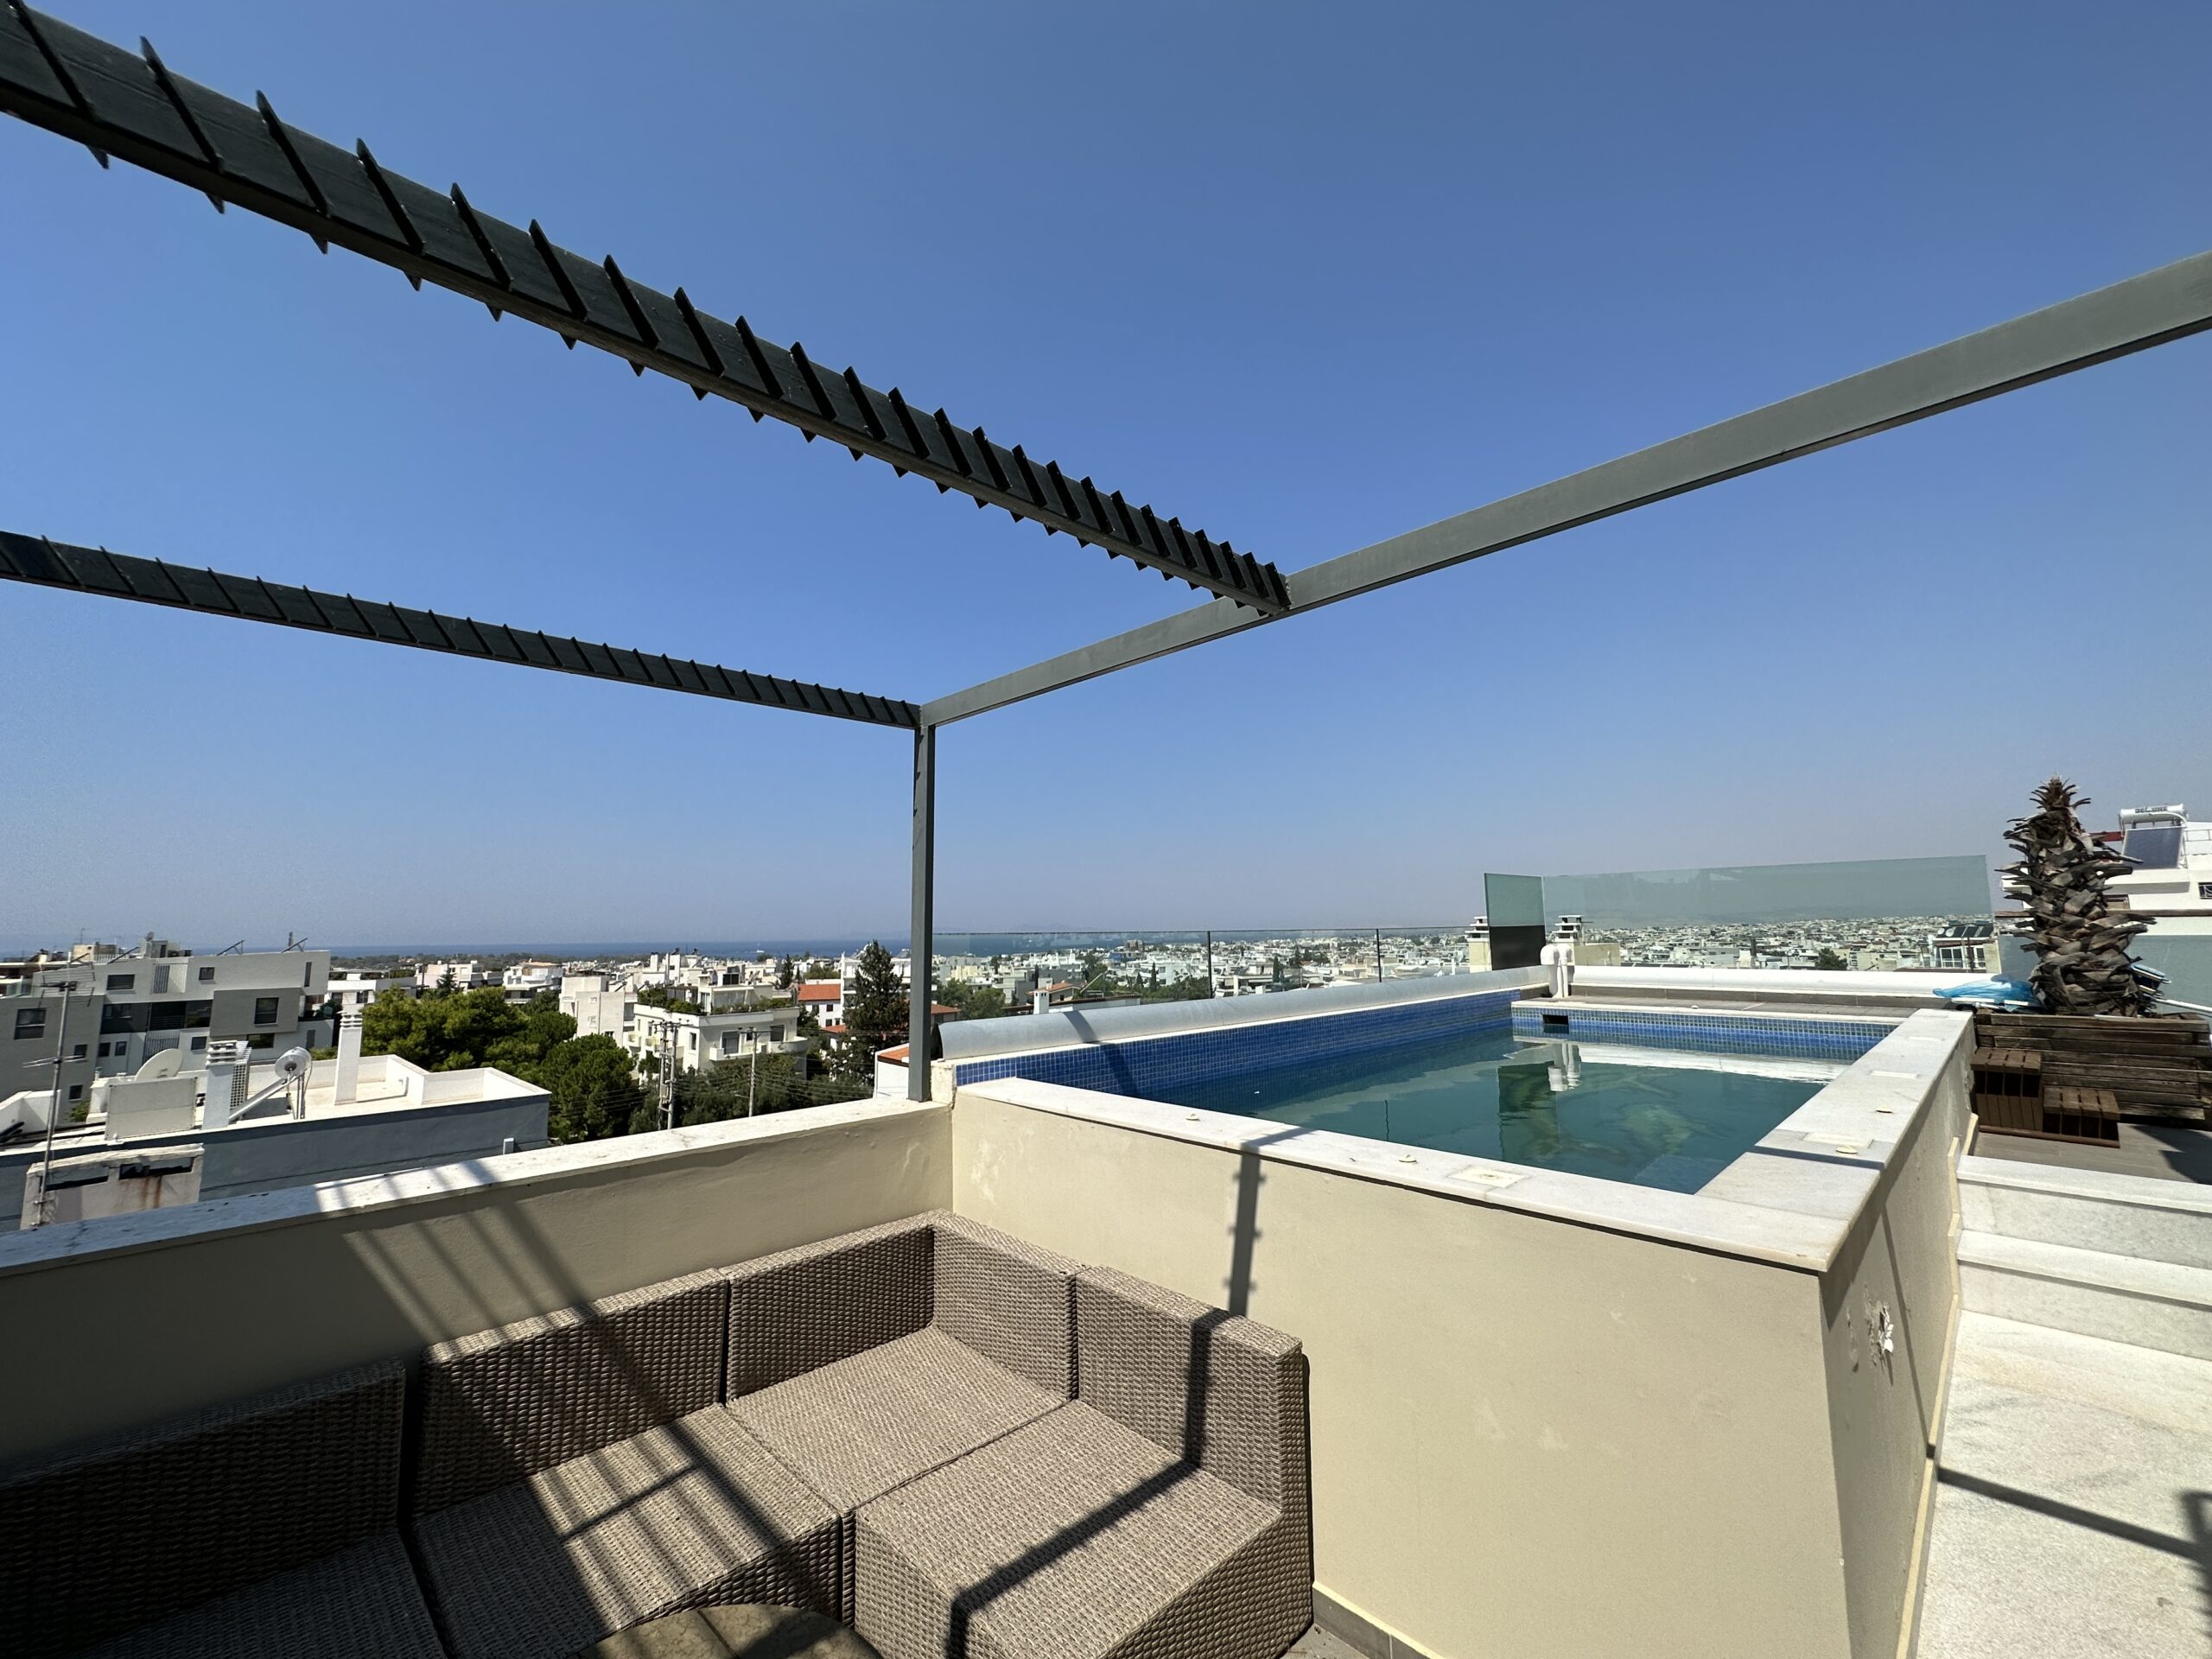 Penthouse Maisonette 212 sqm with swimming pool in Glyfada